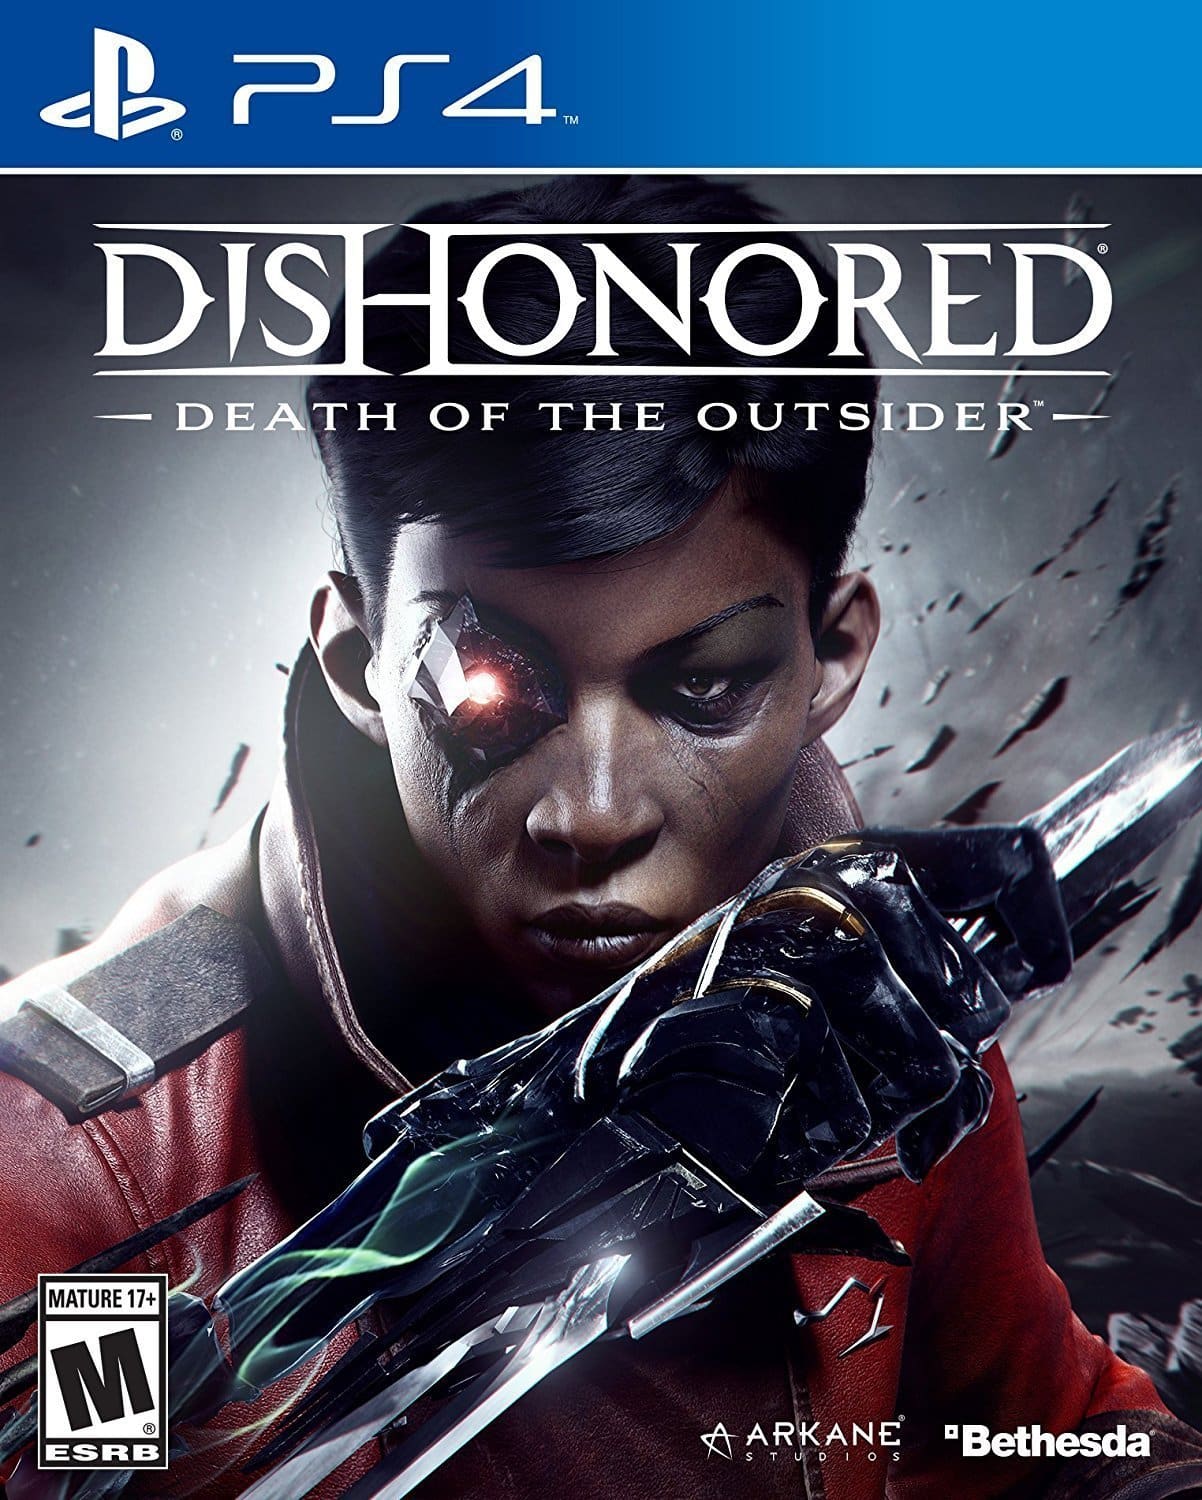 Dishonored: Death of the Outsider player count stats